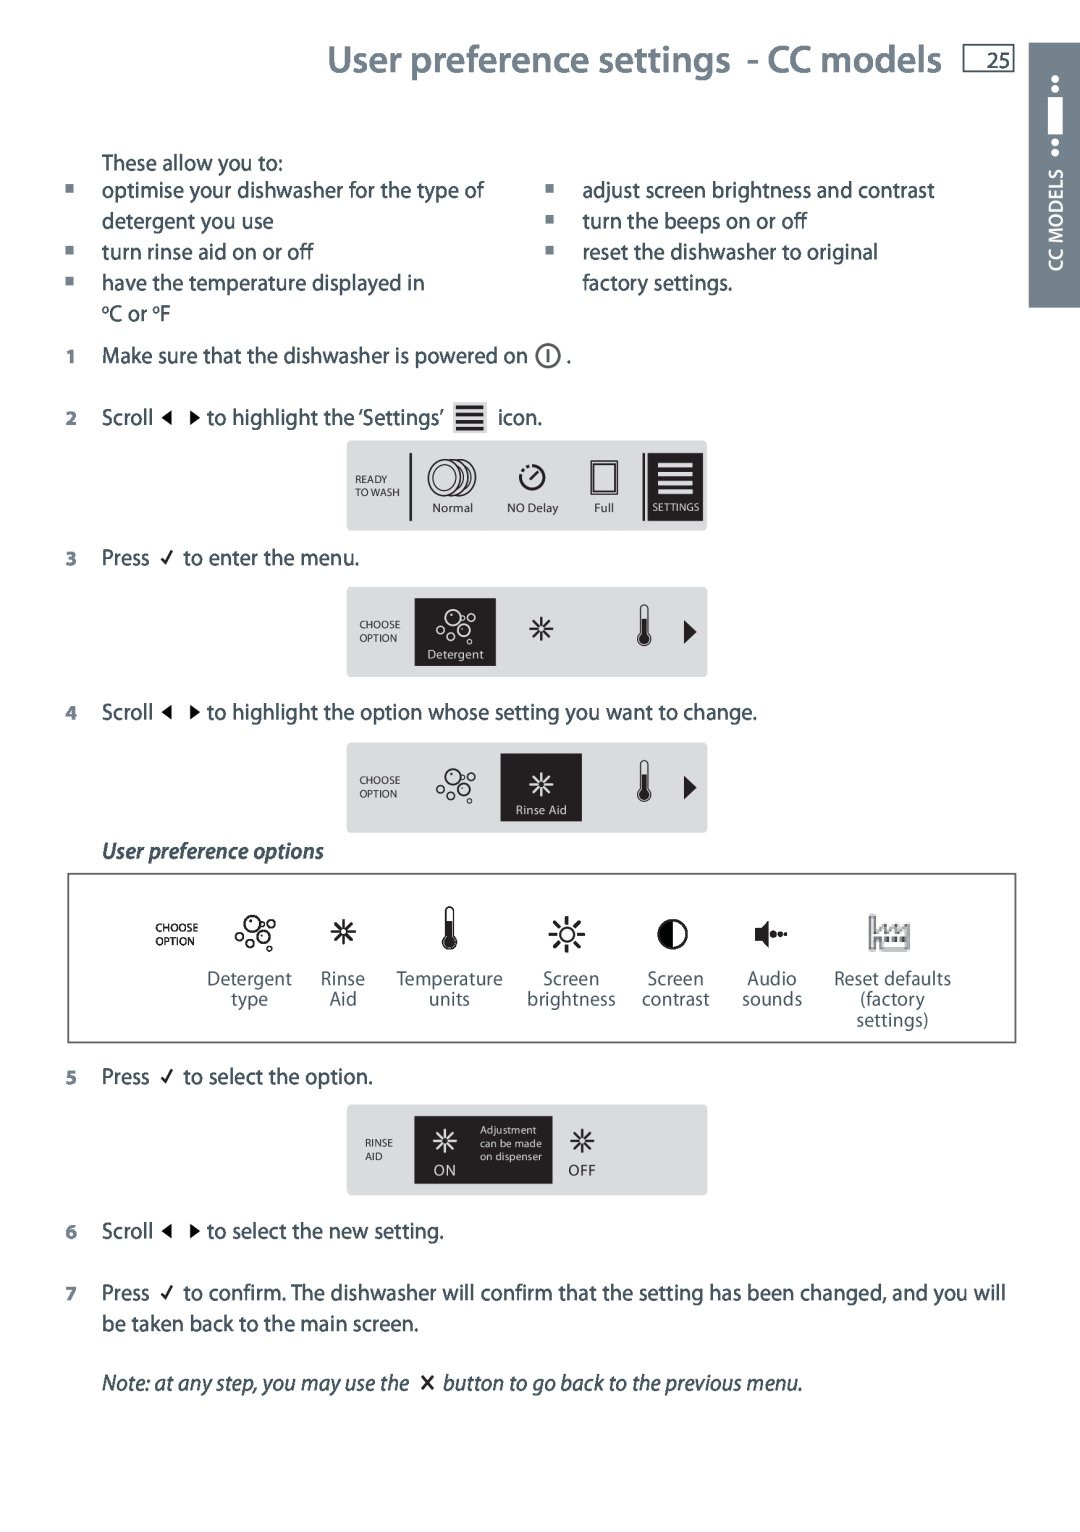 Fisher & Paykel DW60CE, DW60CC manual User preference settings - CC models, User preference options 